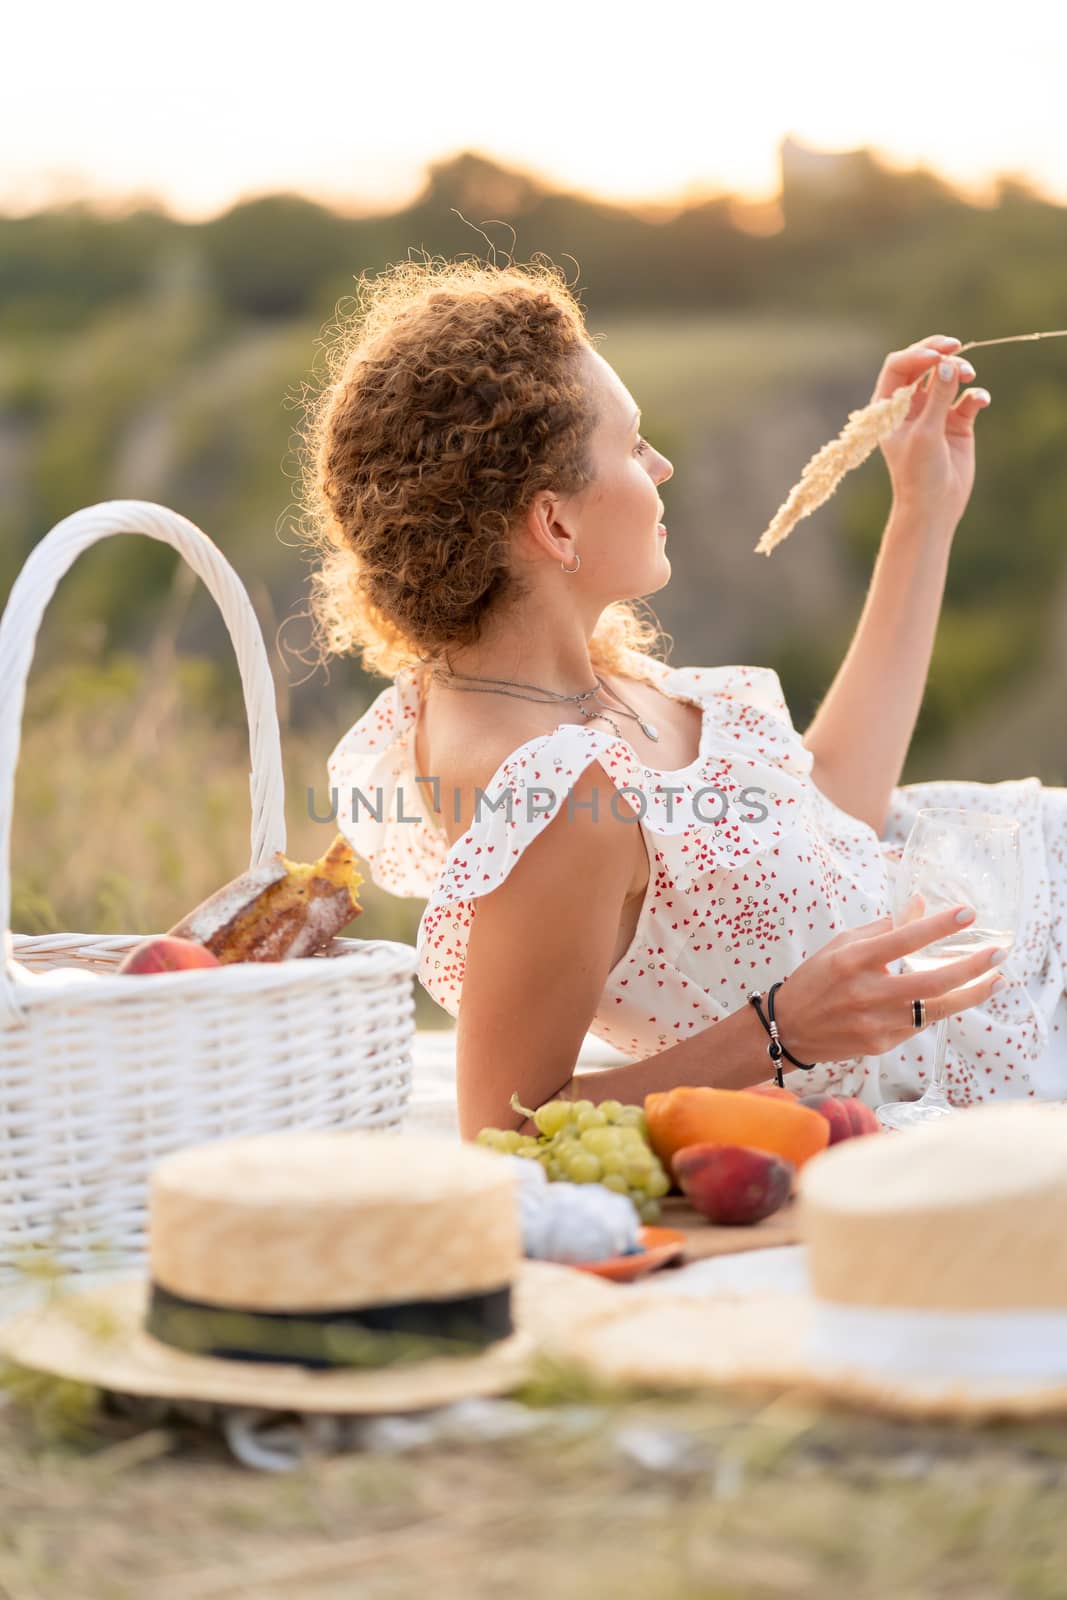 Beautiful girl enjoys a picnic at sunset in a beautiful place